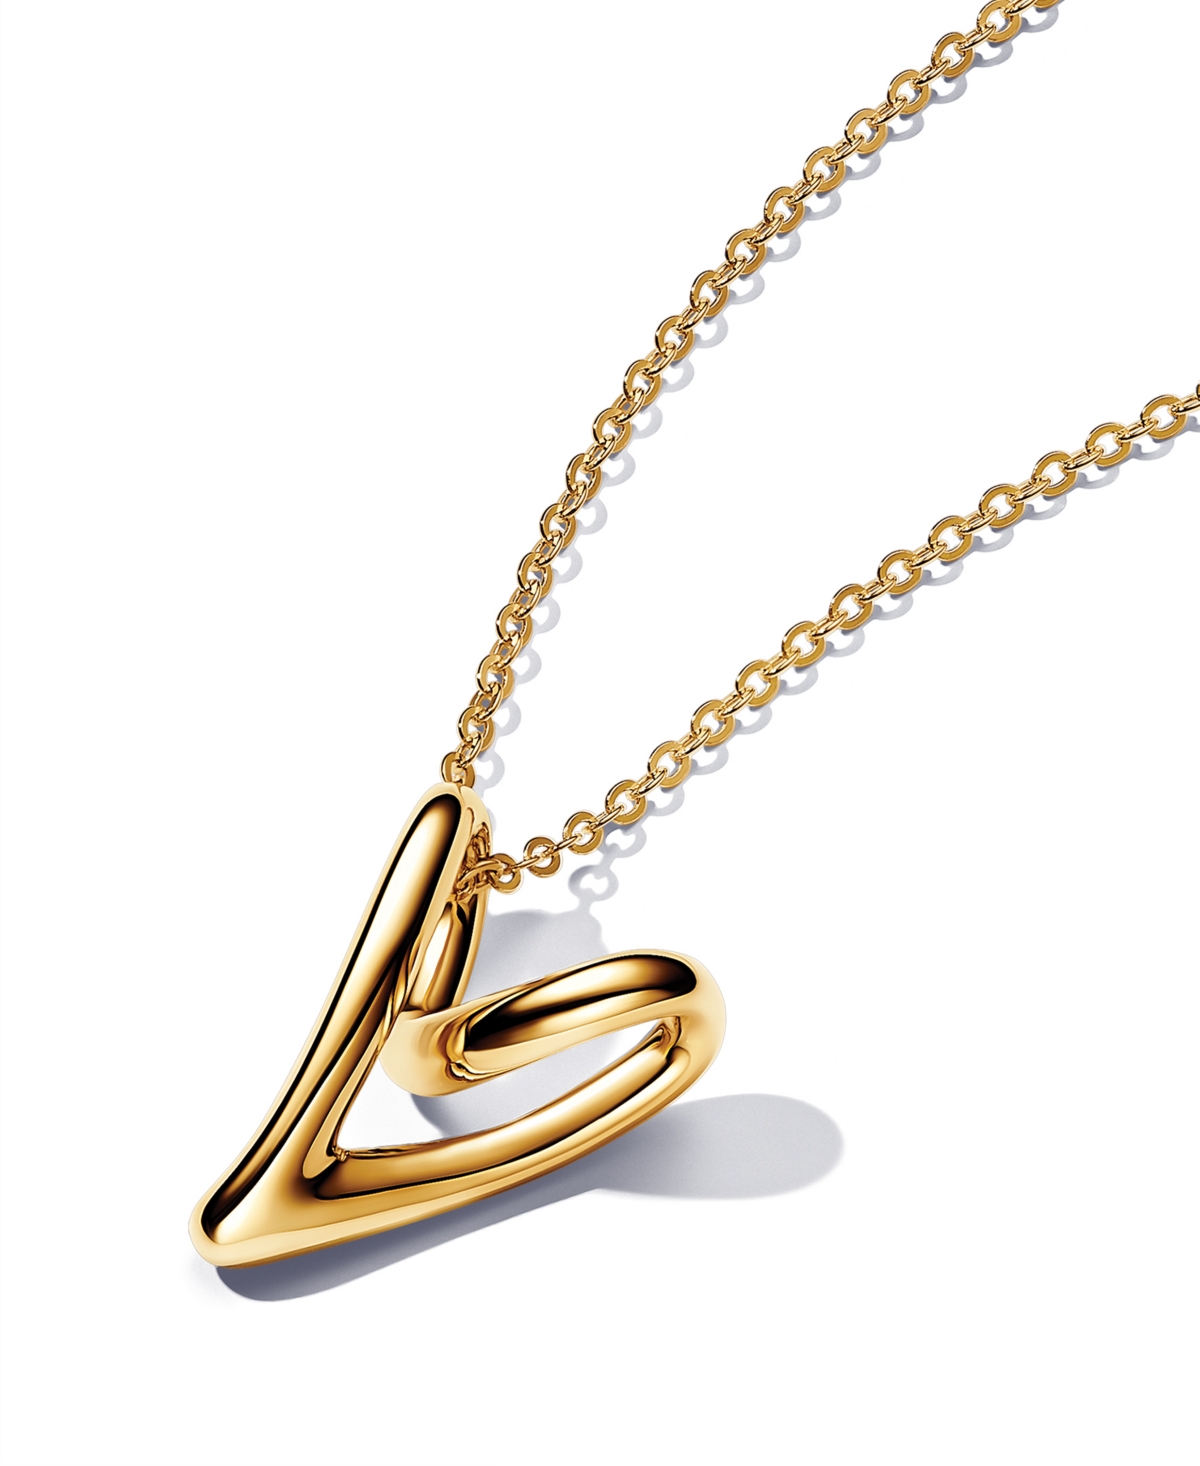 14K Gold-Plated Shaped Heart Pendant 27.6 inch Necklace - Gold